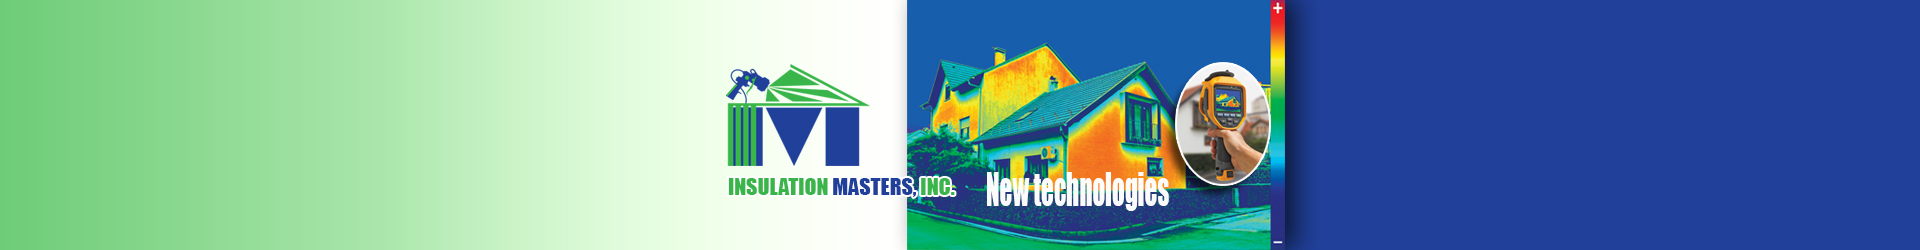 Insulations Masters, Inc.